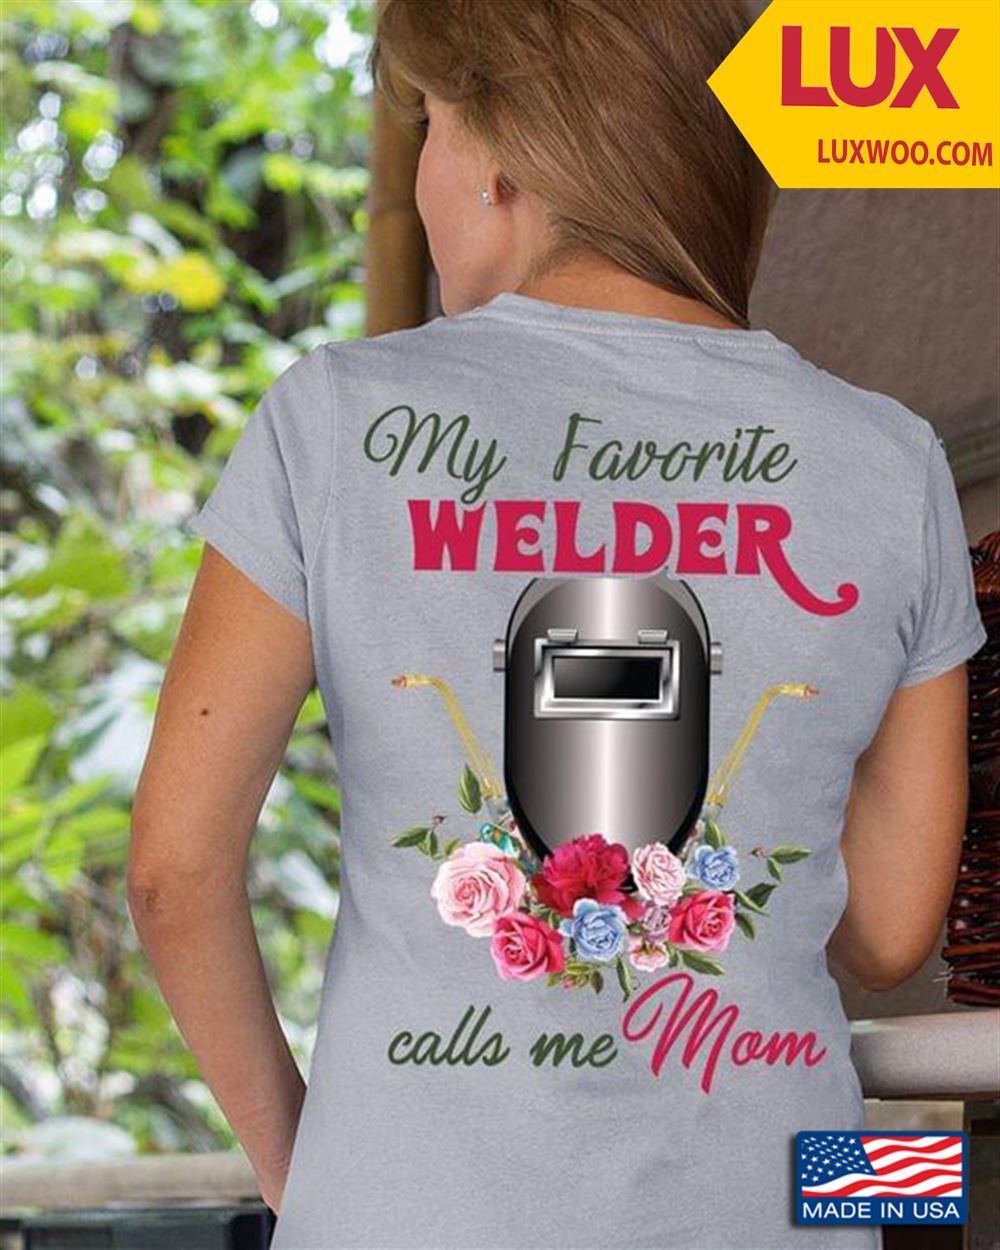 My Favorite Welder Calls Me Mom Shirt Size Up To 5xl